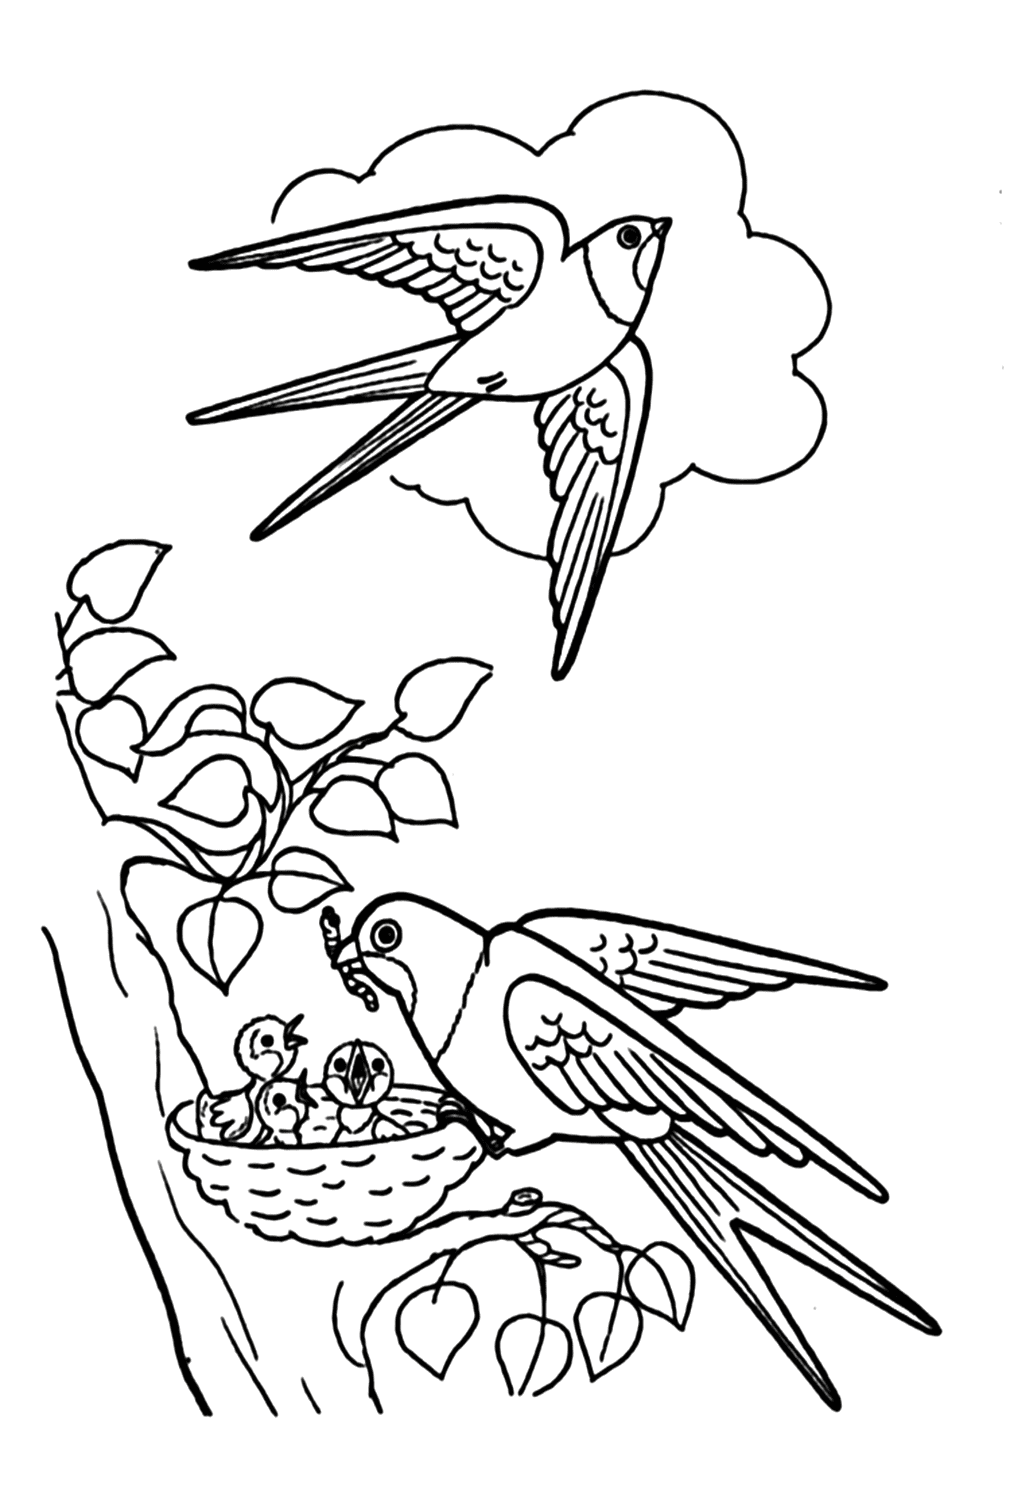 Swallow Birds Coloring Page - Free Printable Coloring Pages